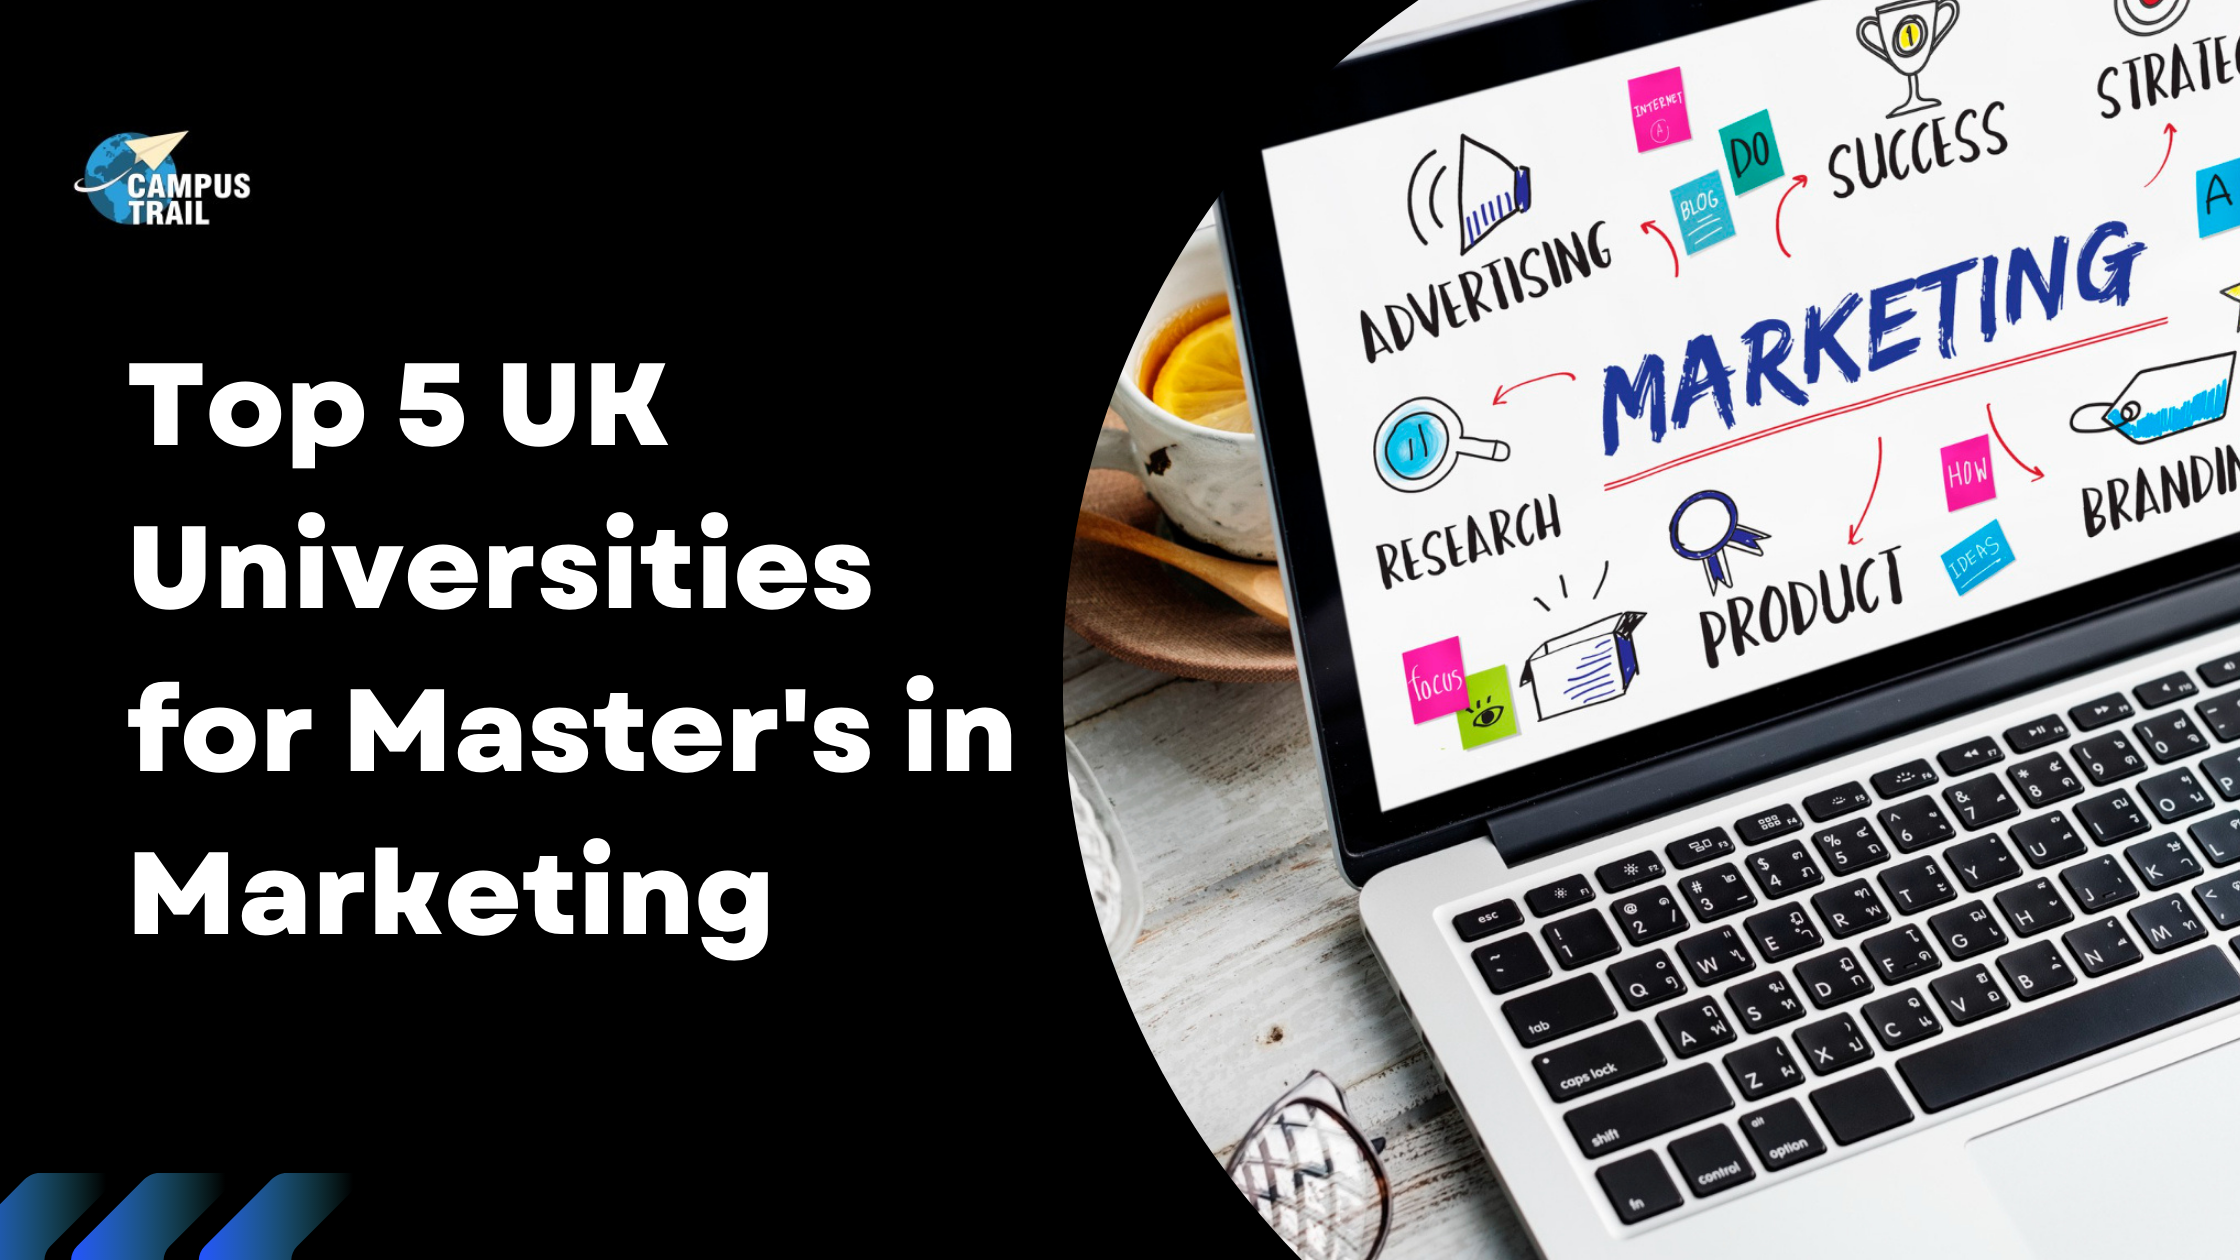 You are currently viewing Top 5 UK Universities For Master’s in Marketing